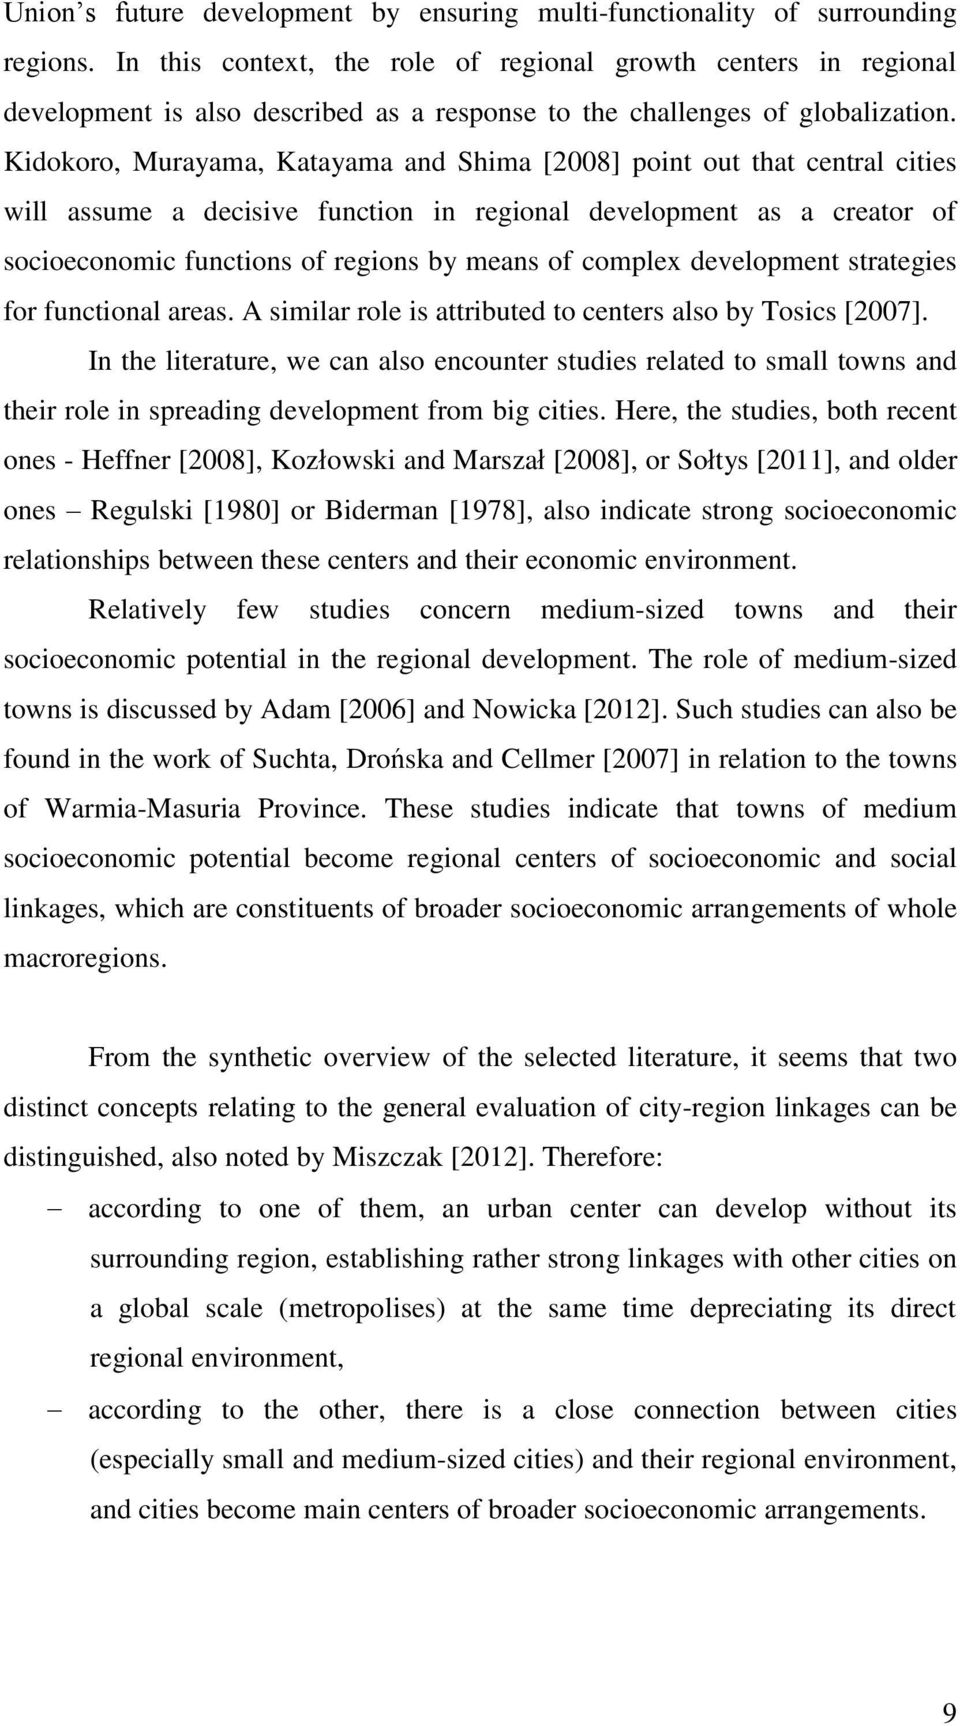 Kidokoro, Murayama, Katayama and Shima [2008] point out that central cities will assume a decisive function in regional development as a creator of socioeconomic functions of regions by means of